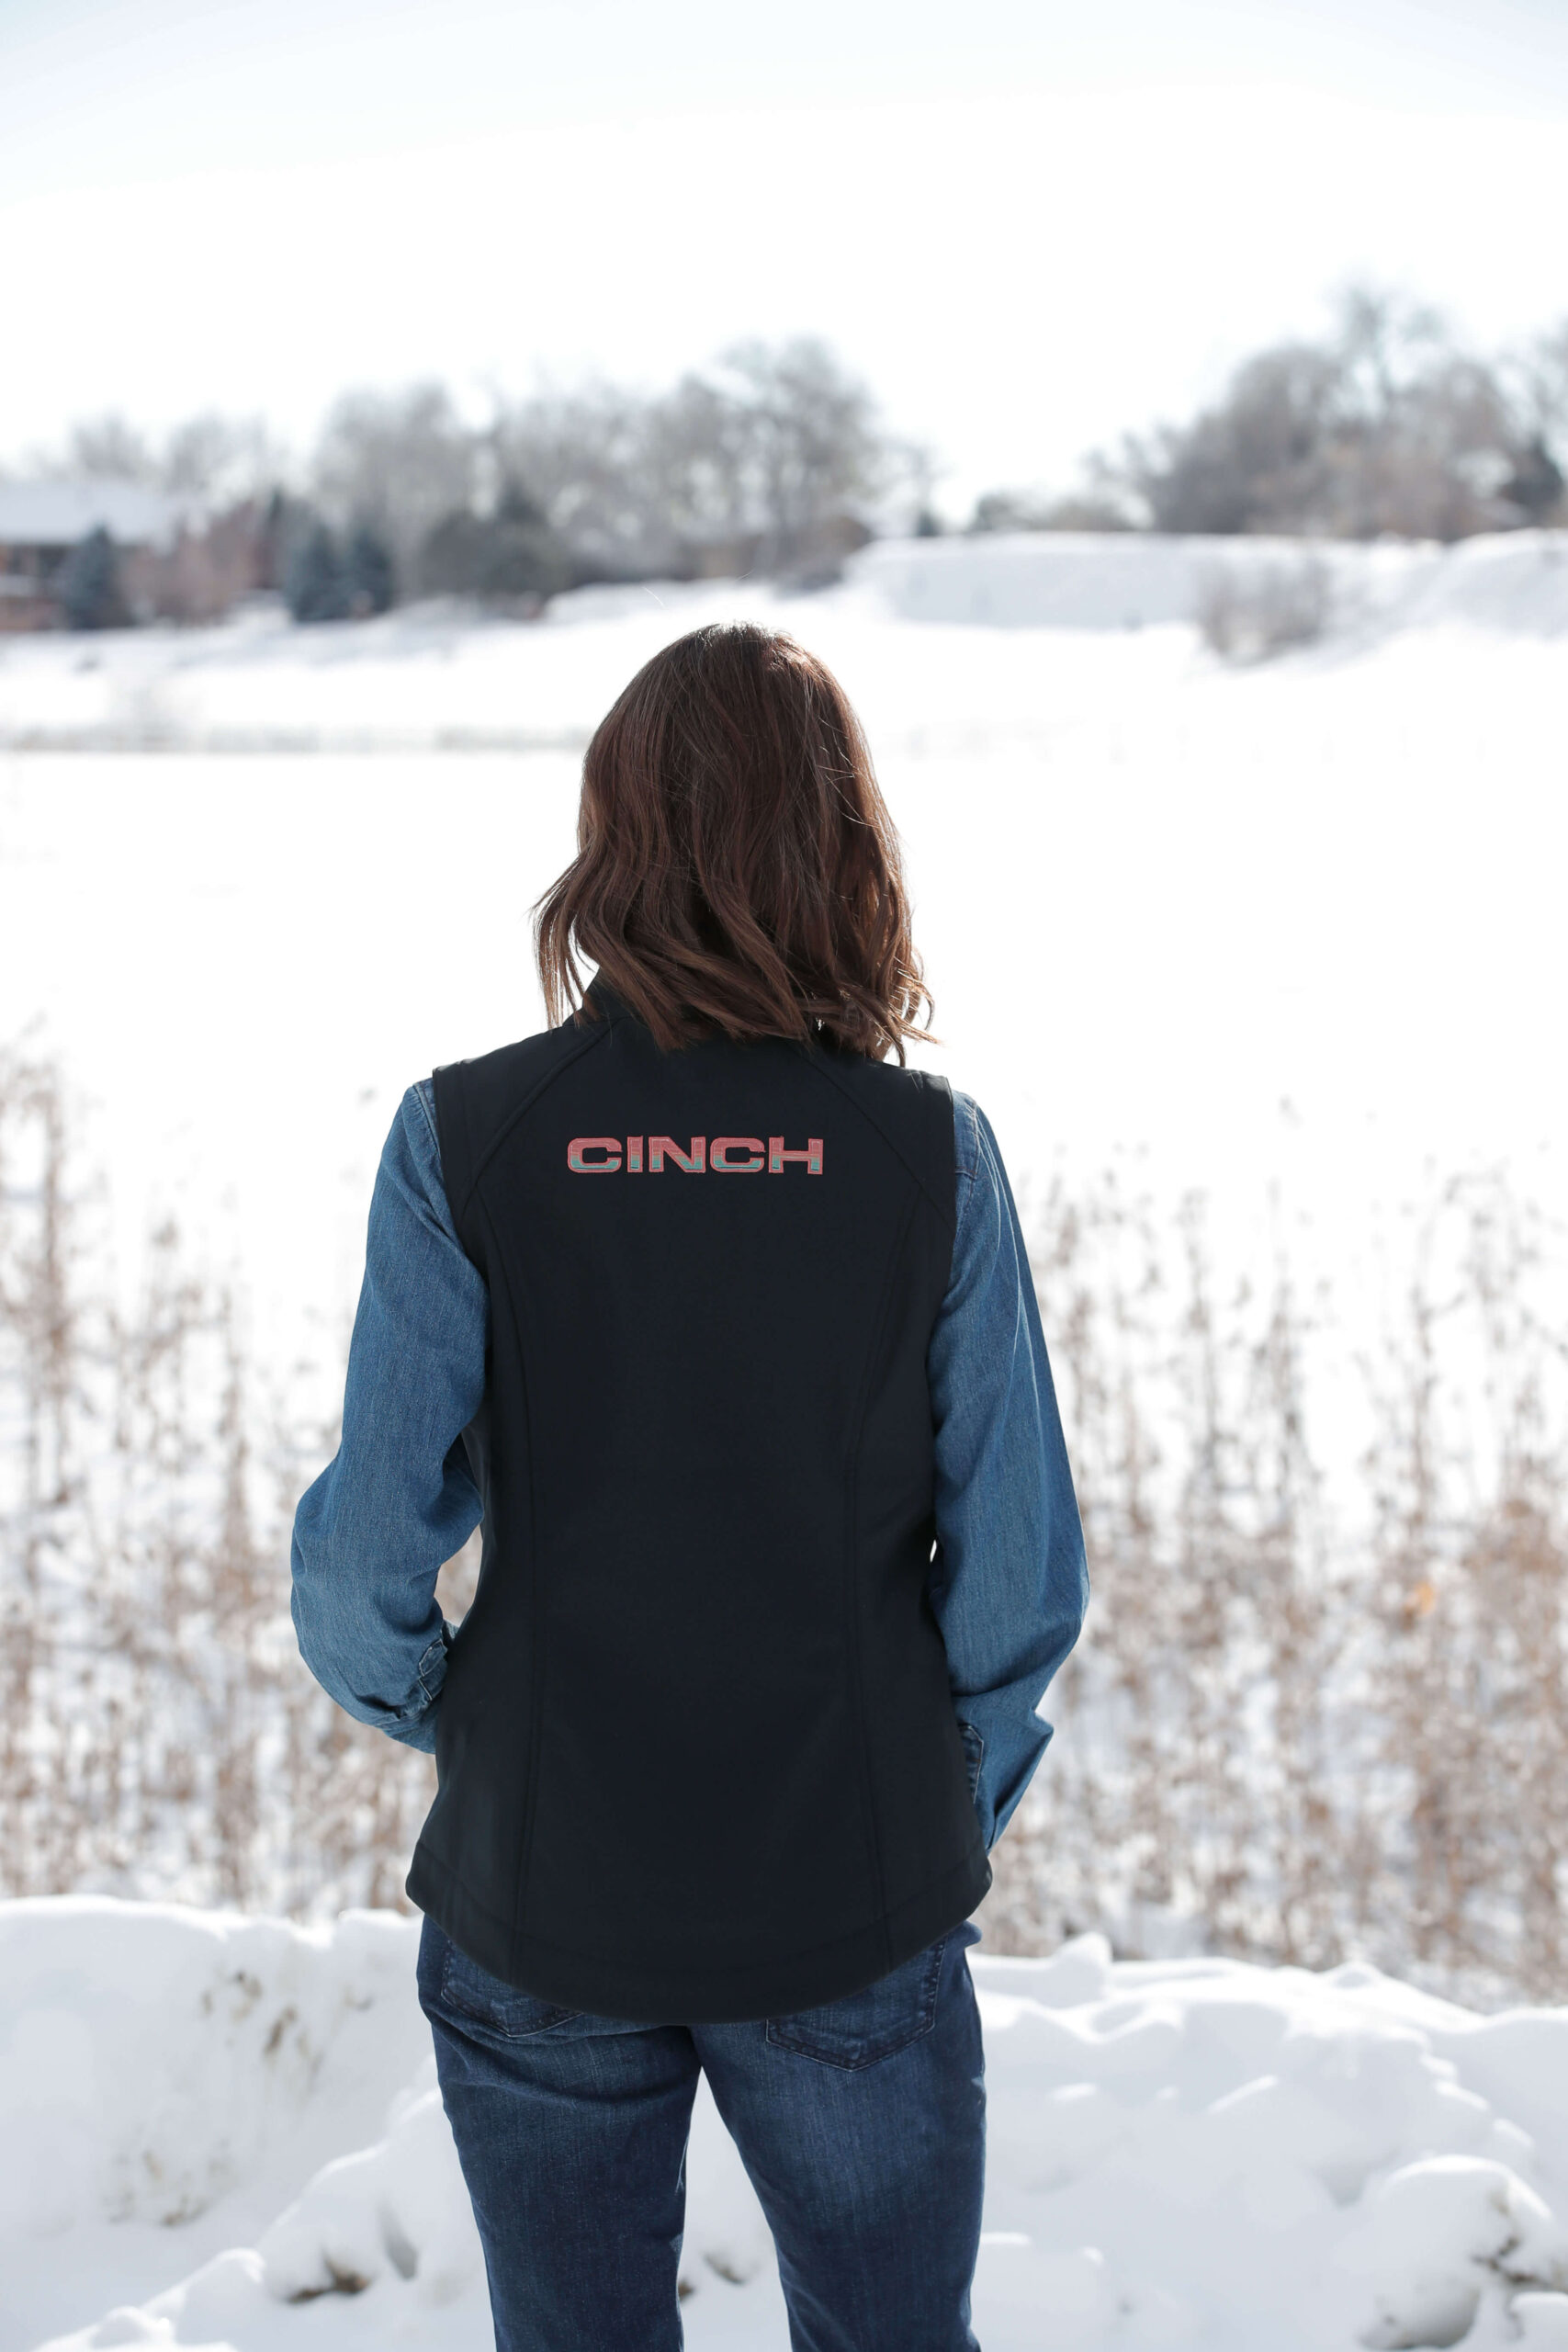 Cinch Bonded Black Embroidered Logo Vest back View with snowy background